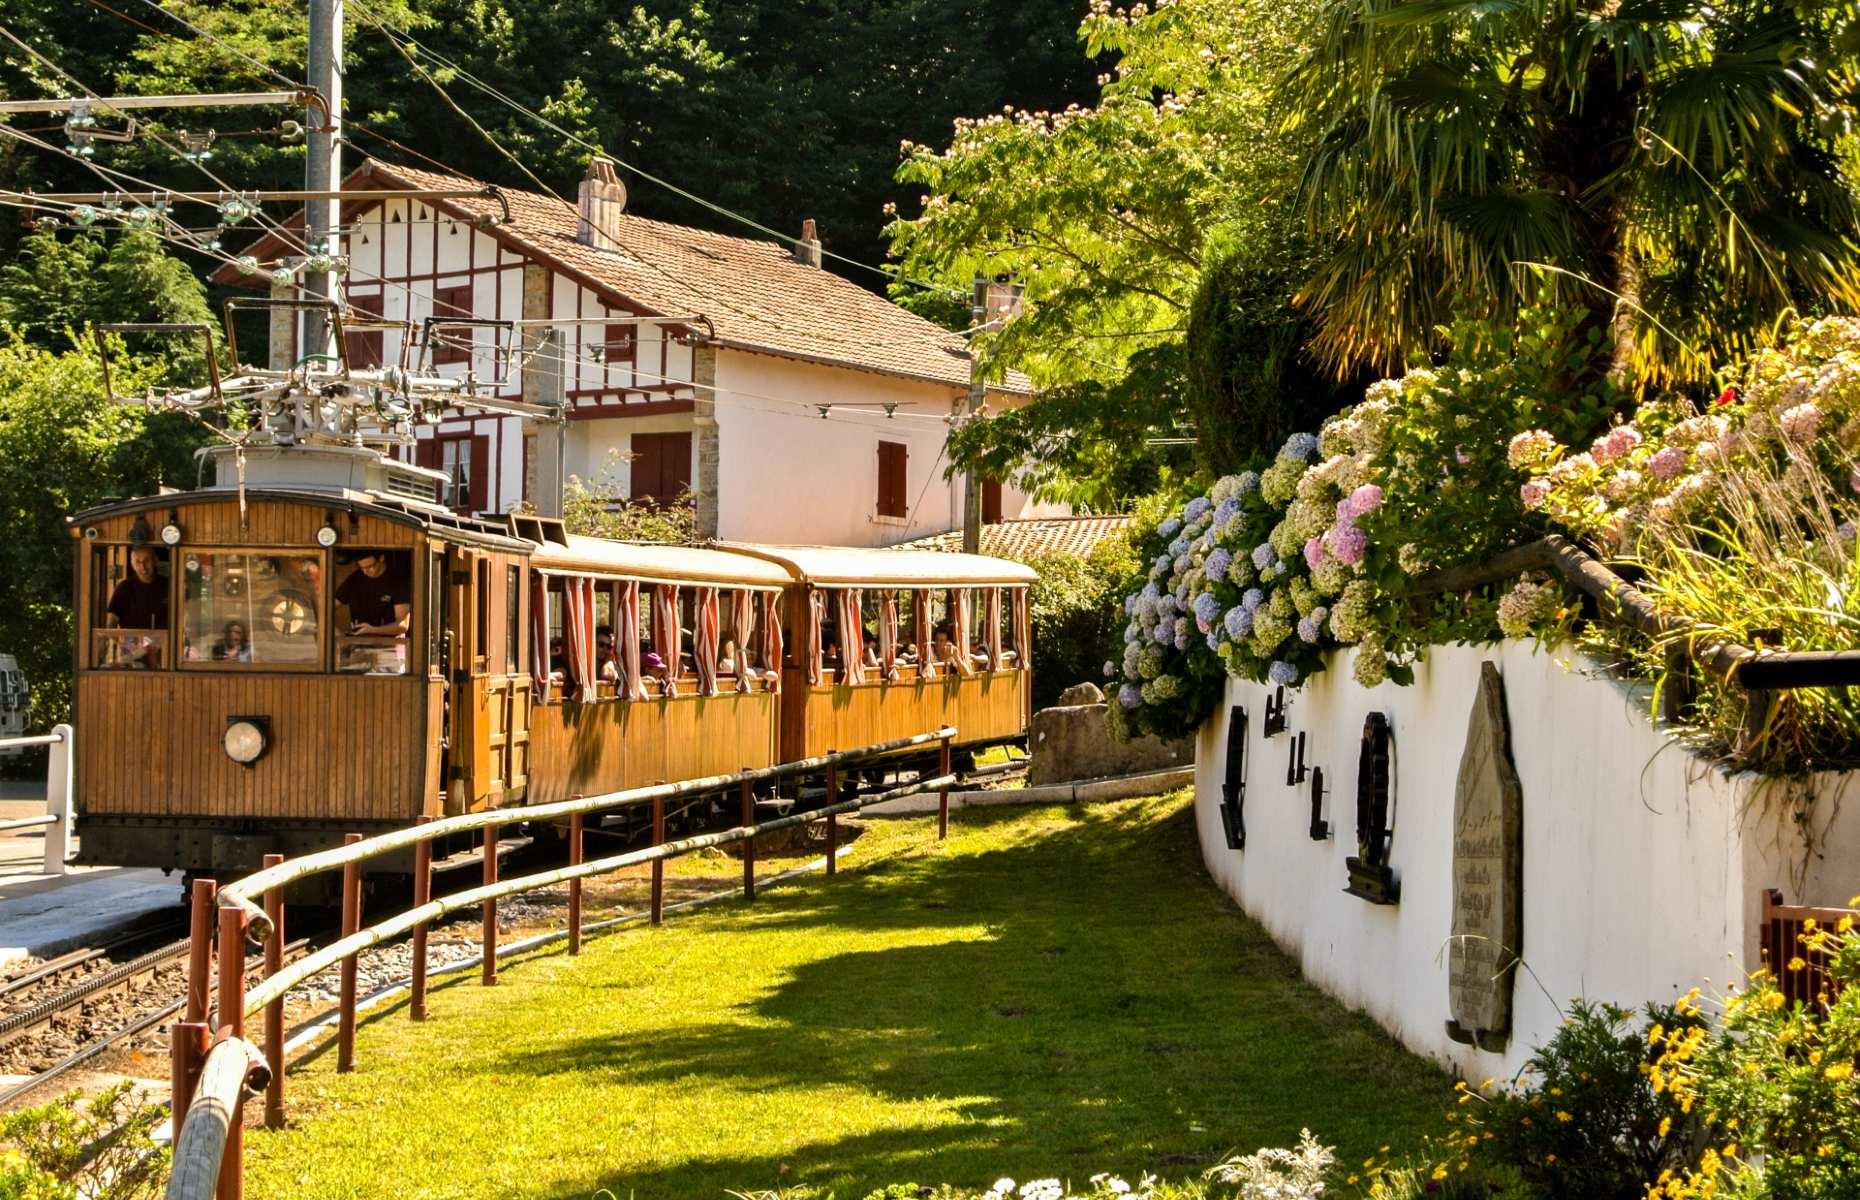 <p>You’d be hard-pressed to find a much more adorable train journey than this. Located in France’s captivating Basque Country, the <a href="https://www.rhune.com/en/">Rhune Railway</a> (or Le Petit Train de la Rhune) is a fabulous cog railway which takes passengers on a 35-minute ascent up to the 2,969-foot (905m) summit of its namesake mountain. The picture-perfect chestnut-wood carriages have been navigating this steep section of track since 1924.</p>